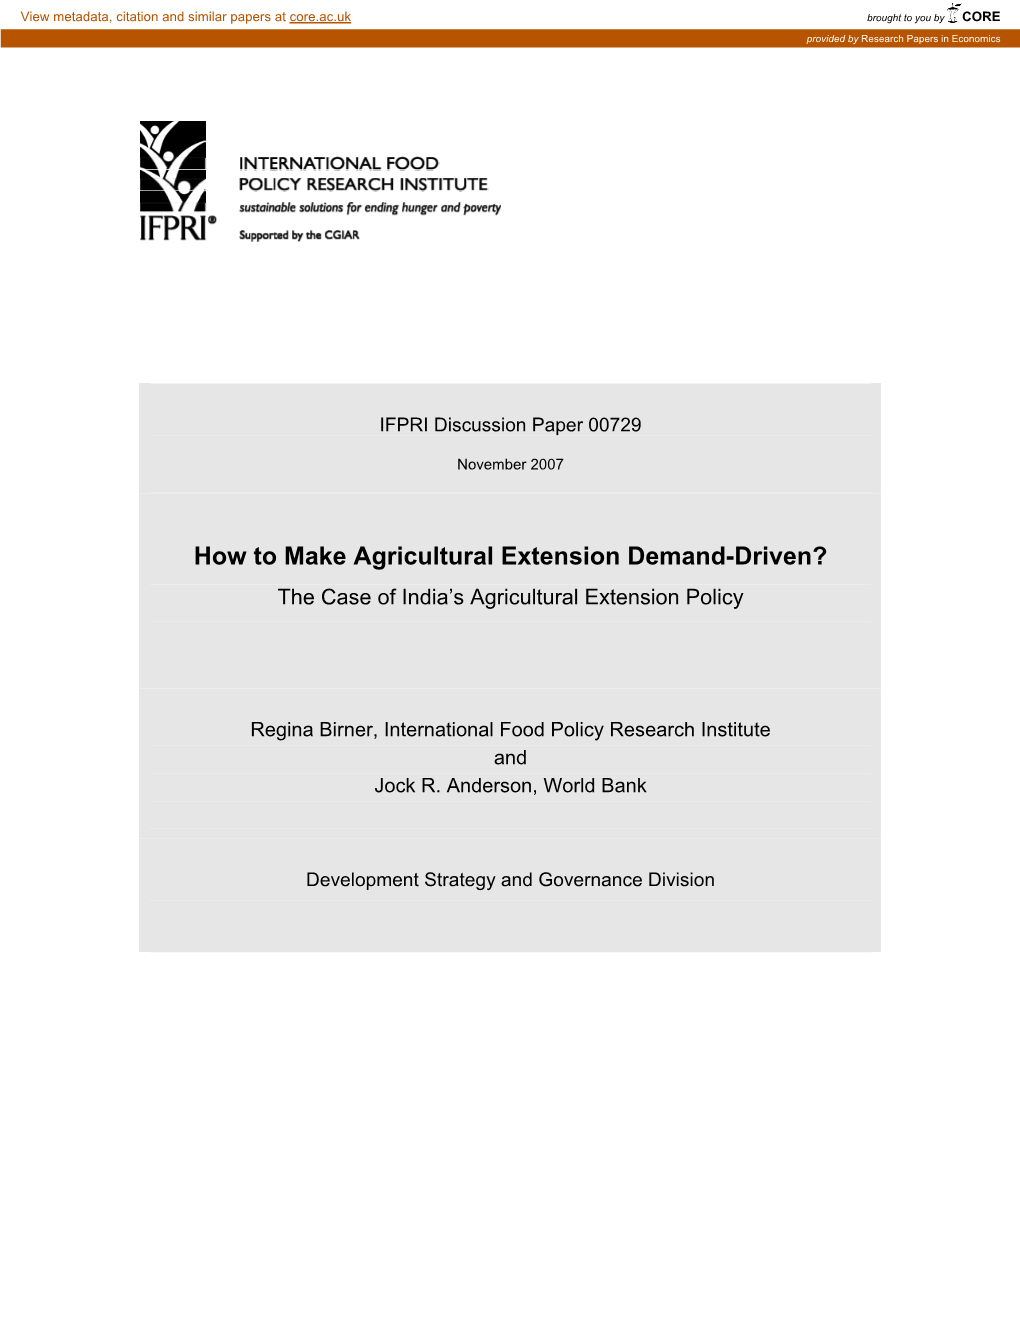 How to Make Agricultural Extension Demand-Driven? the Case of India’S Agricultural Extension Policy